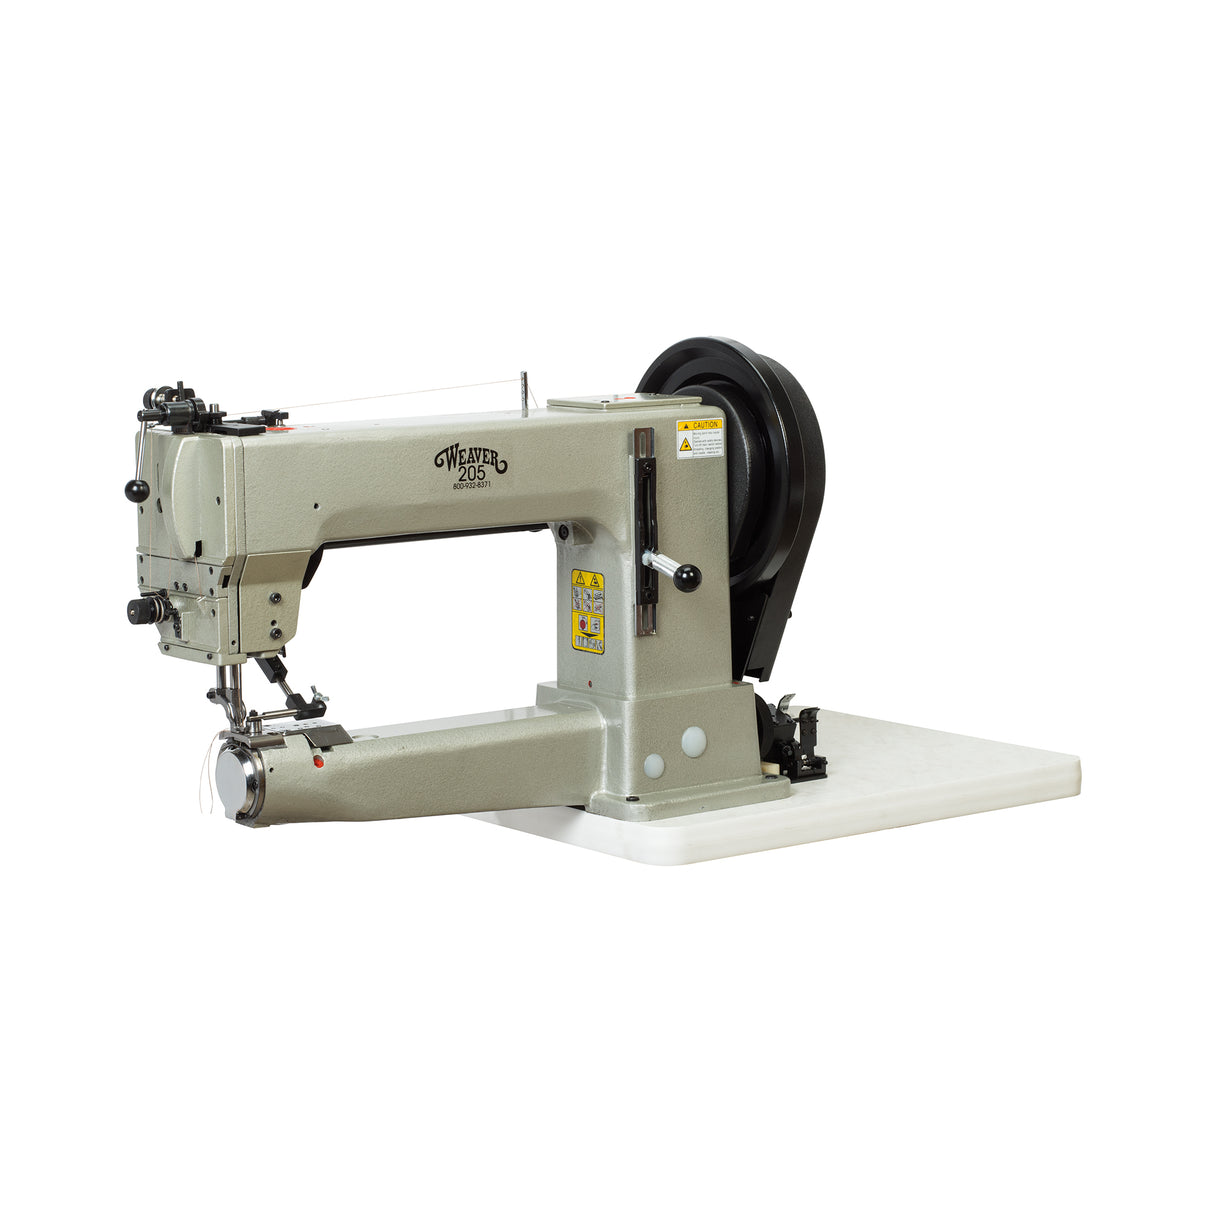 Weaver 205 Sewing Machine, Head Only